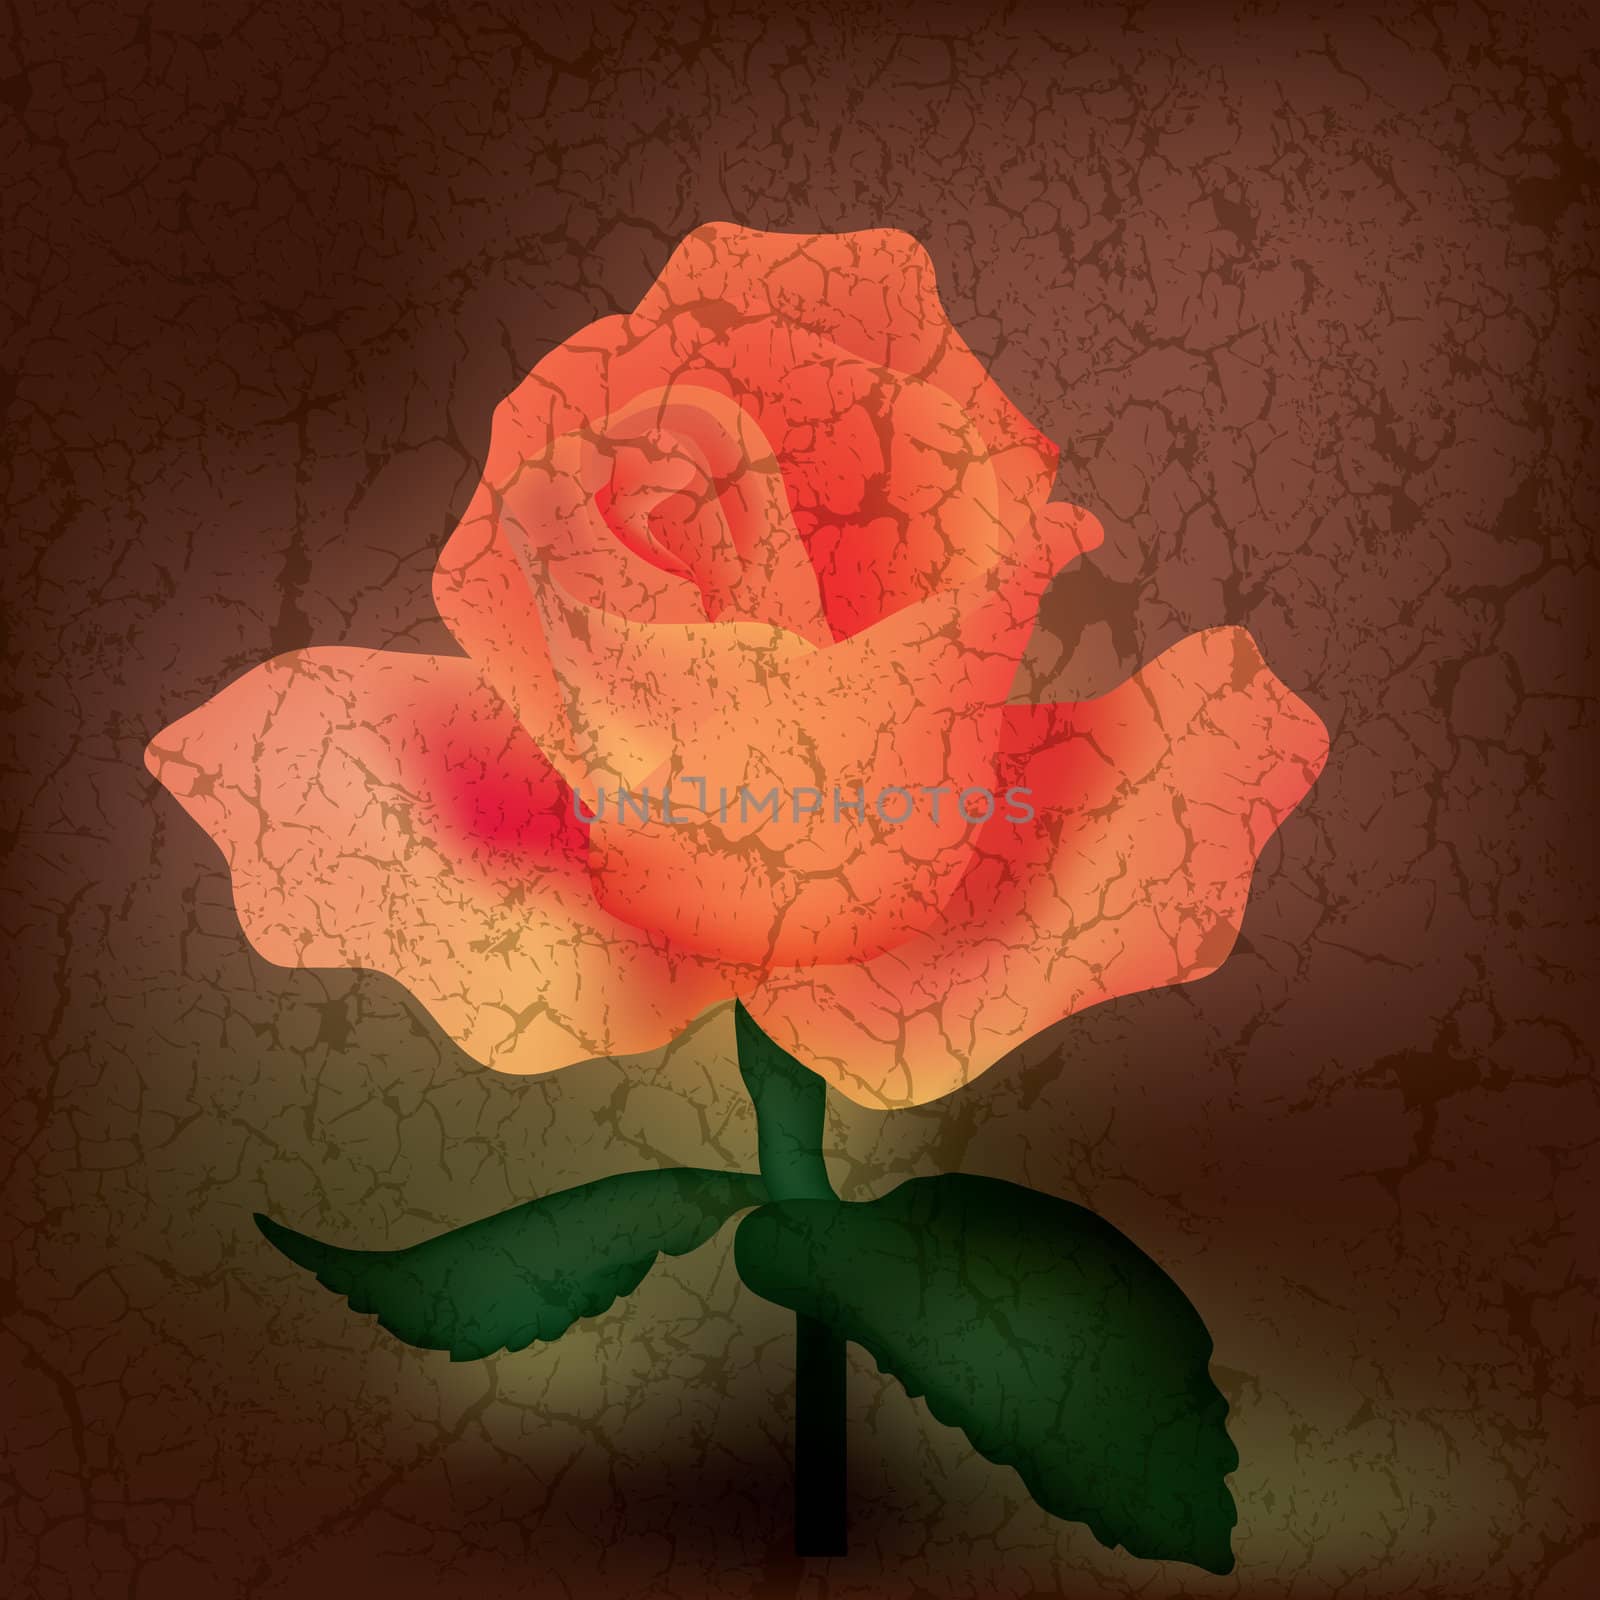 abstract floral illustration with rose on cracked background